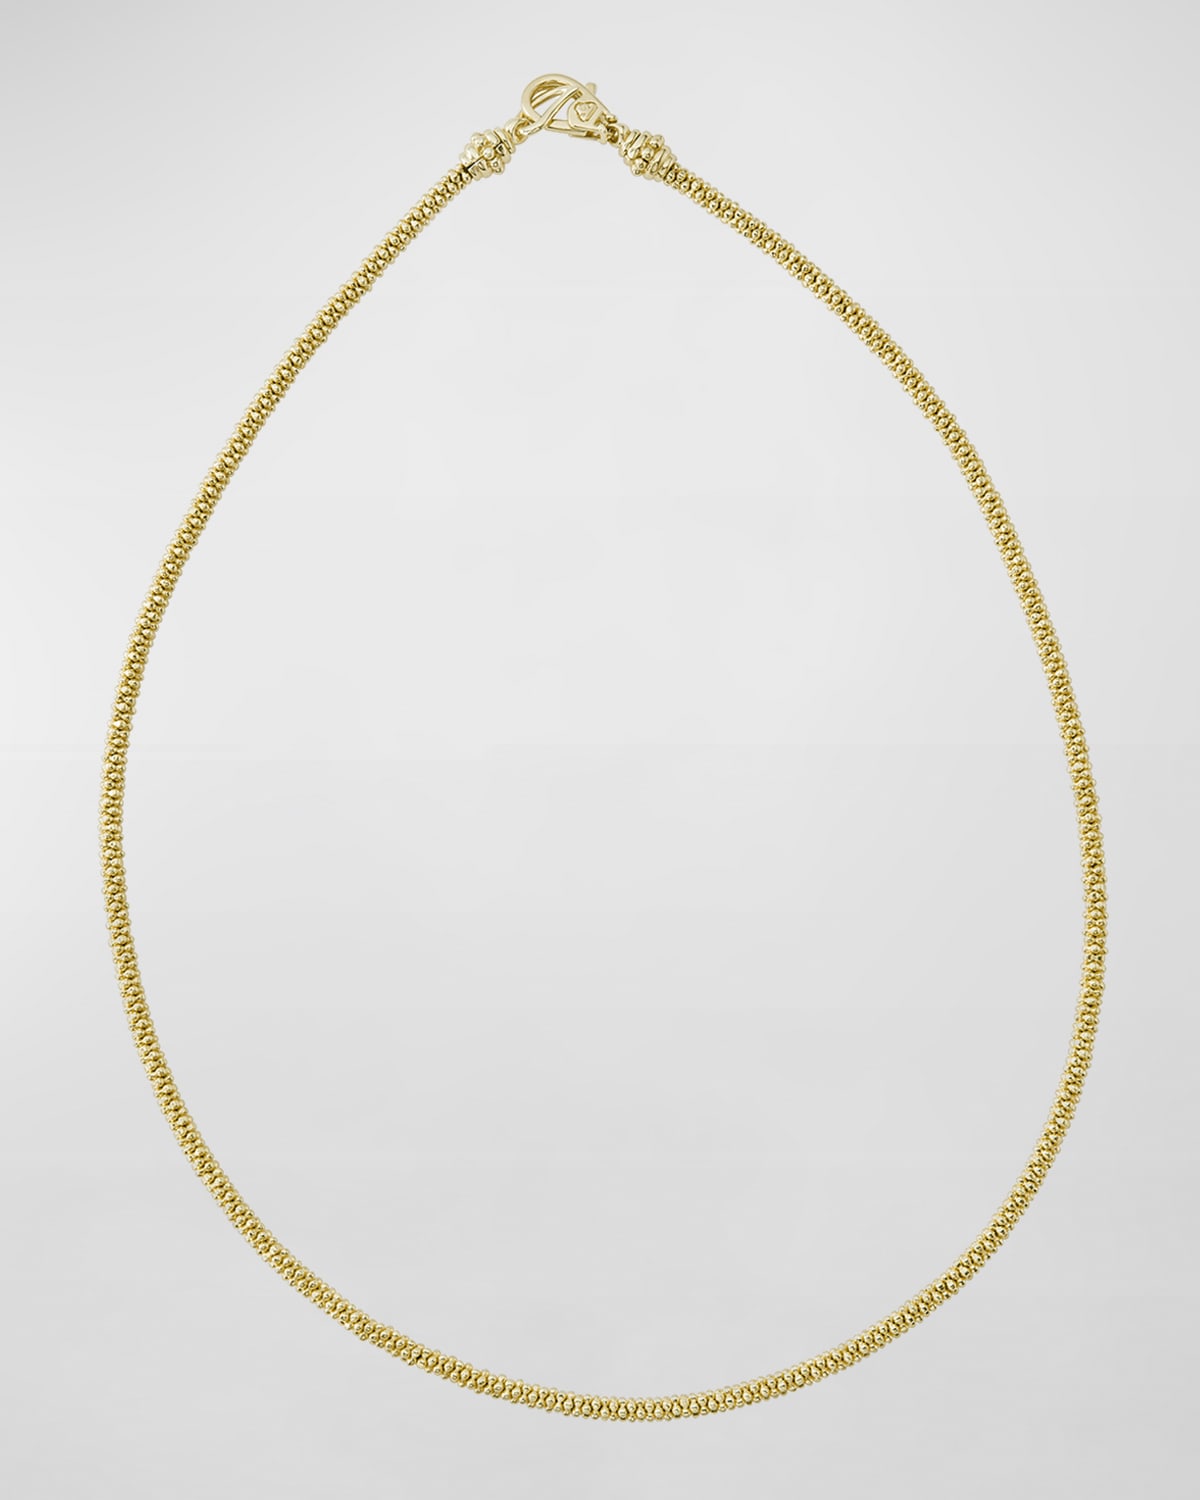 3mm 18K Gold Caviar Rope Necklace, 16"L